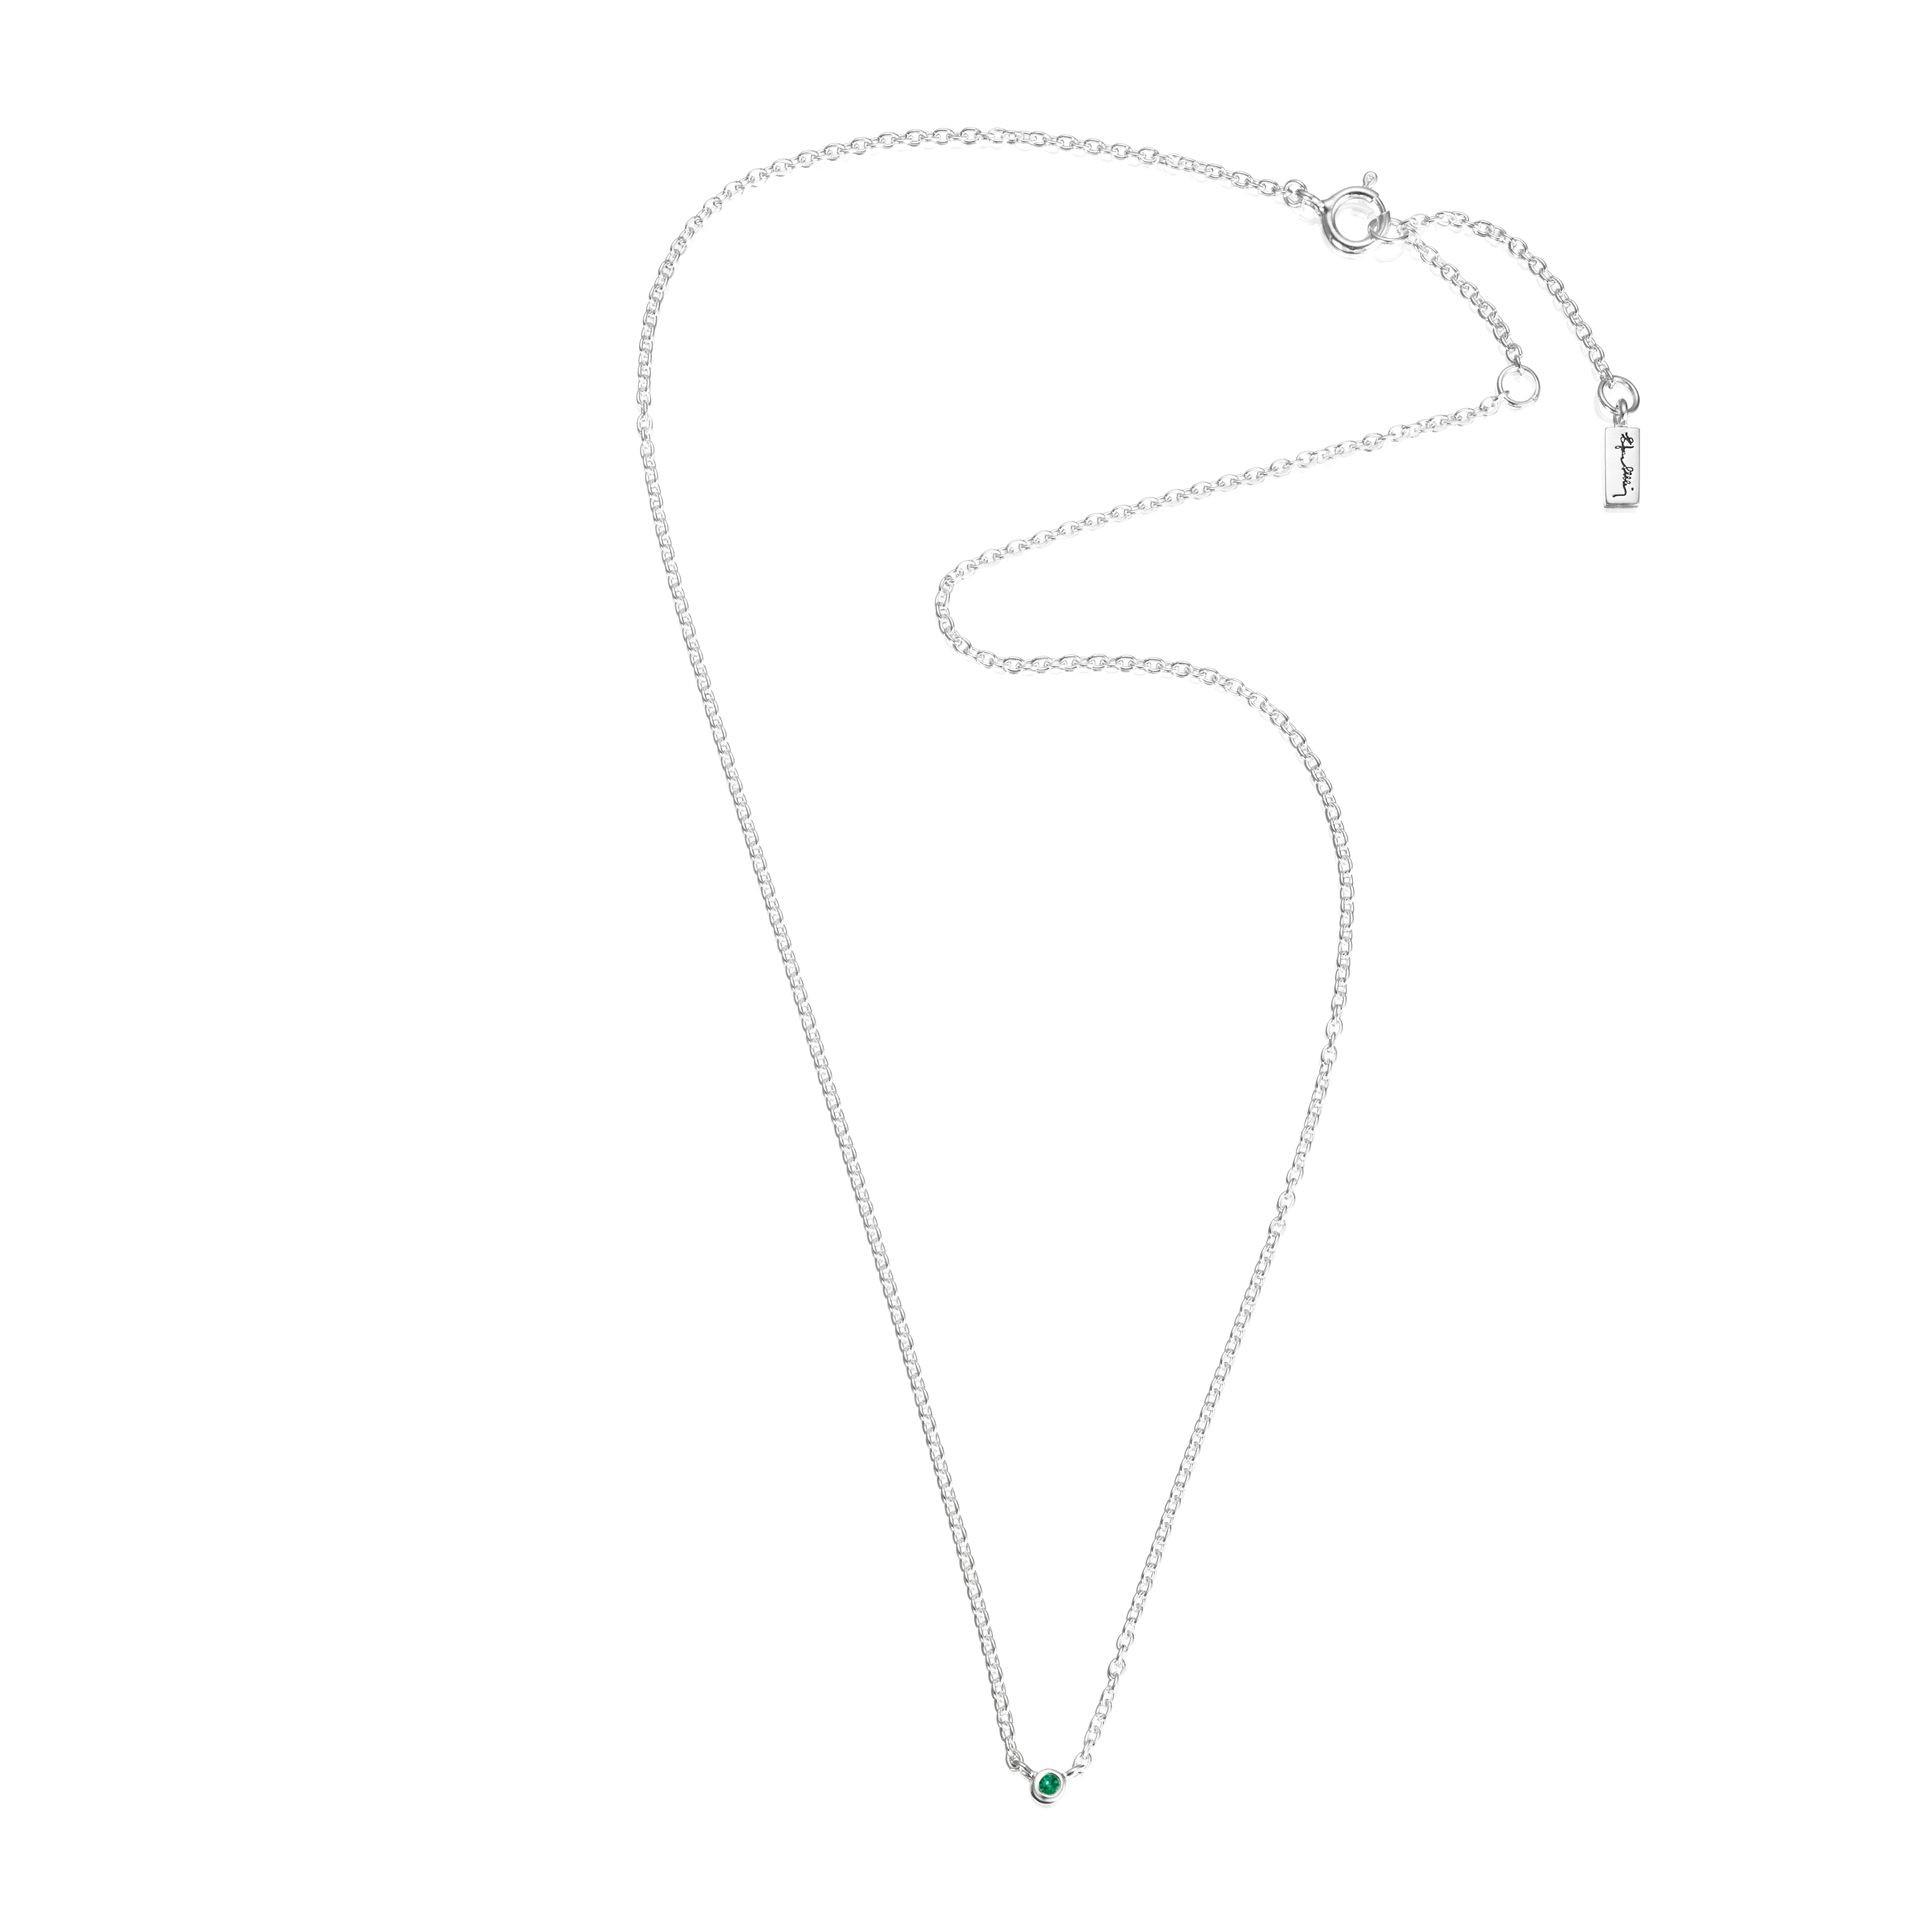 Micro Blink Necklace - Green Emerald